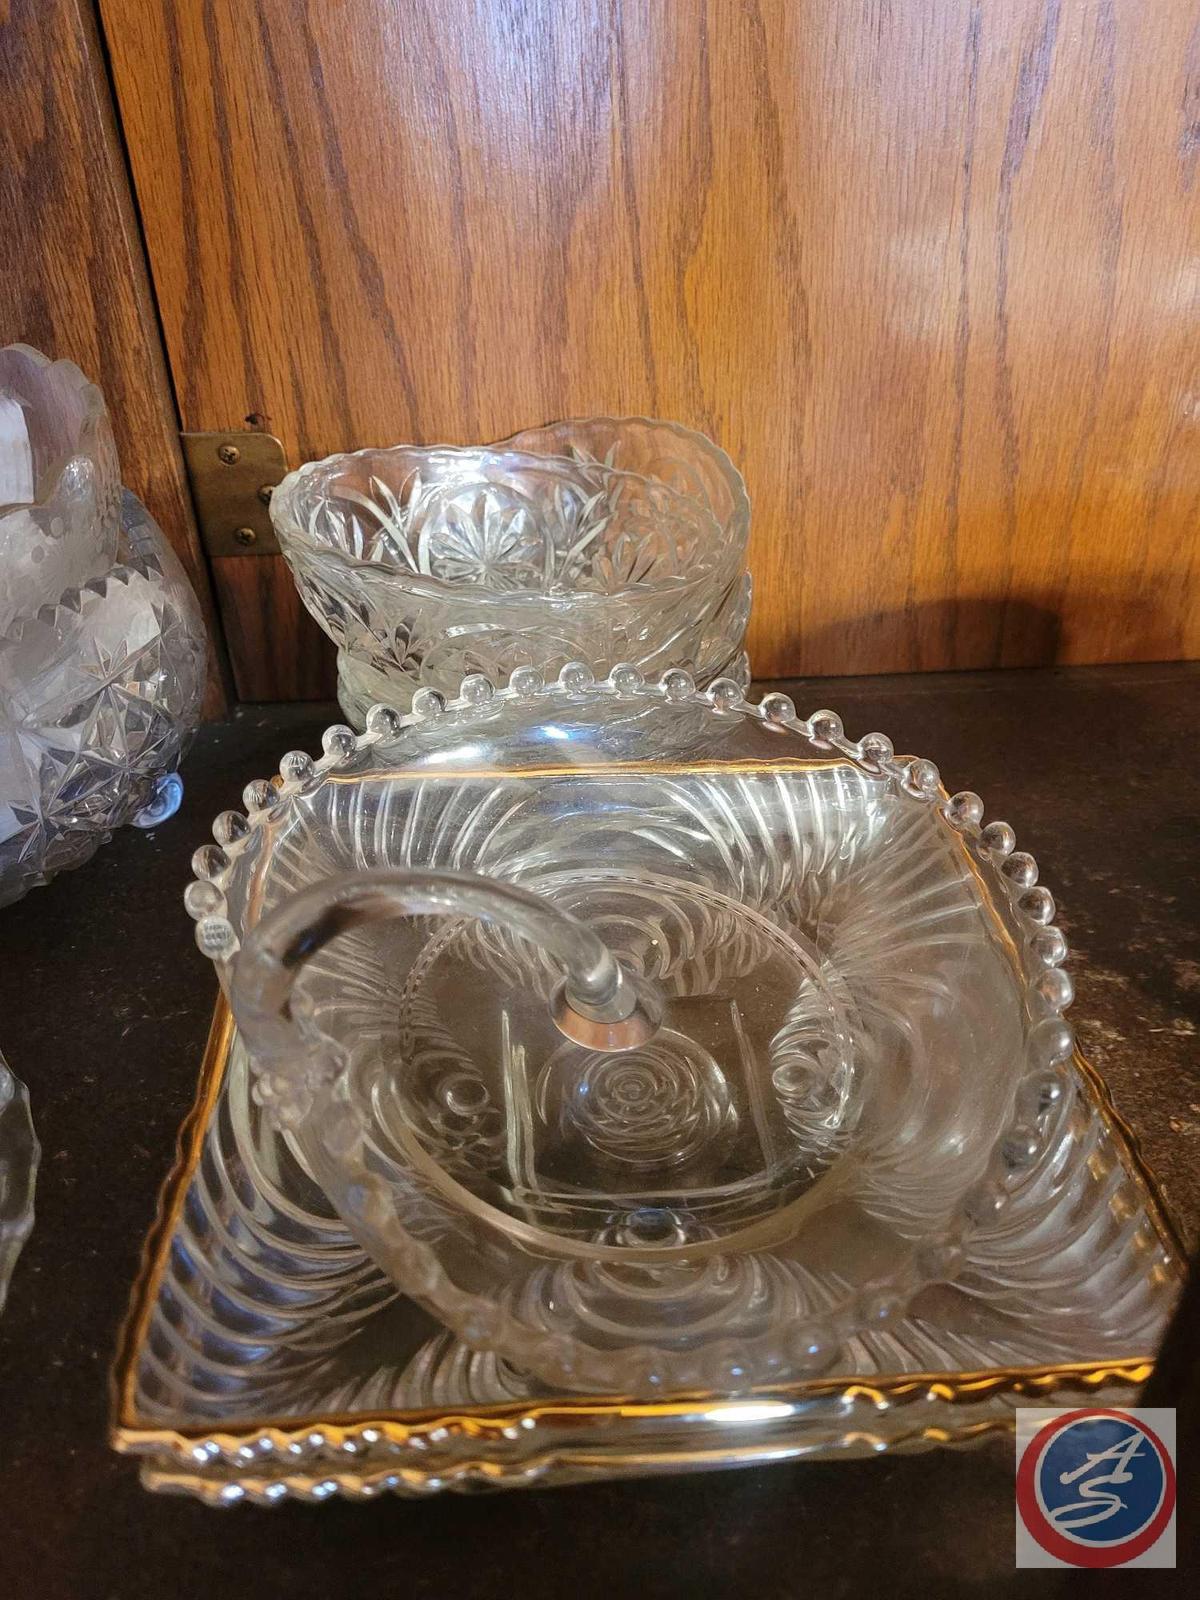 Assorted sizes of glass dishes, Unsure if any dishes are crystal. There are serving trays, candy